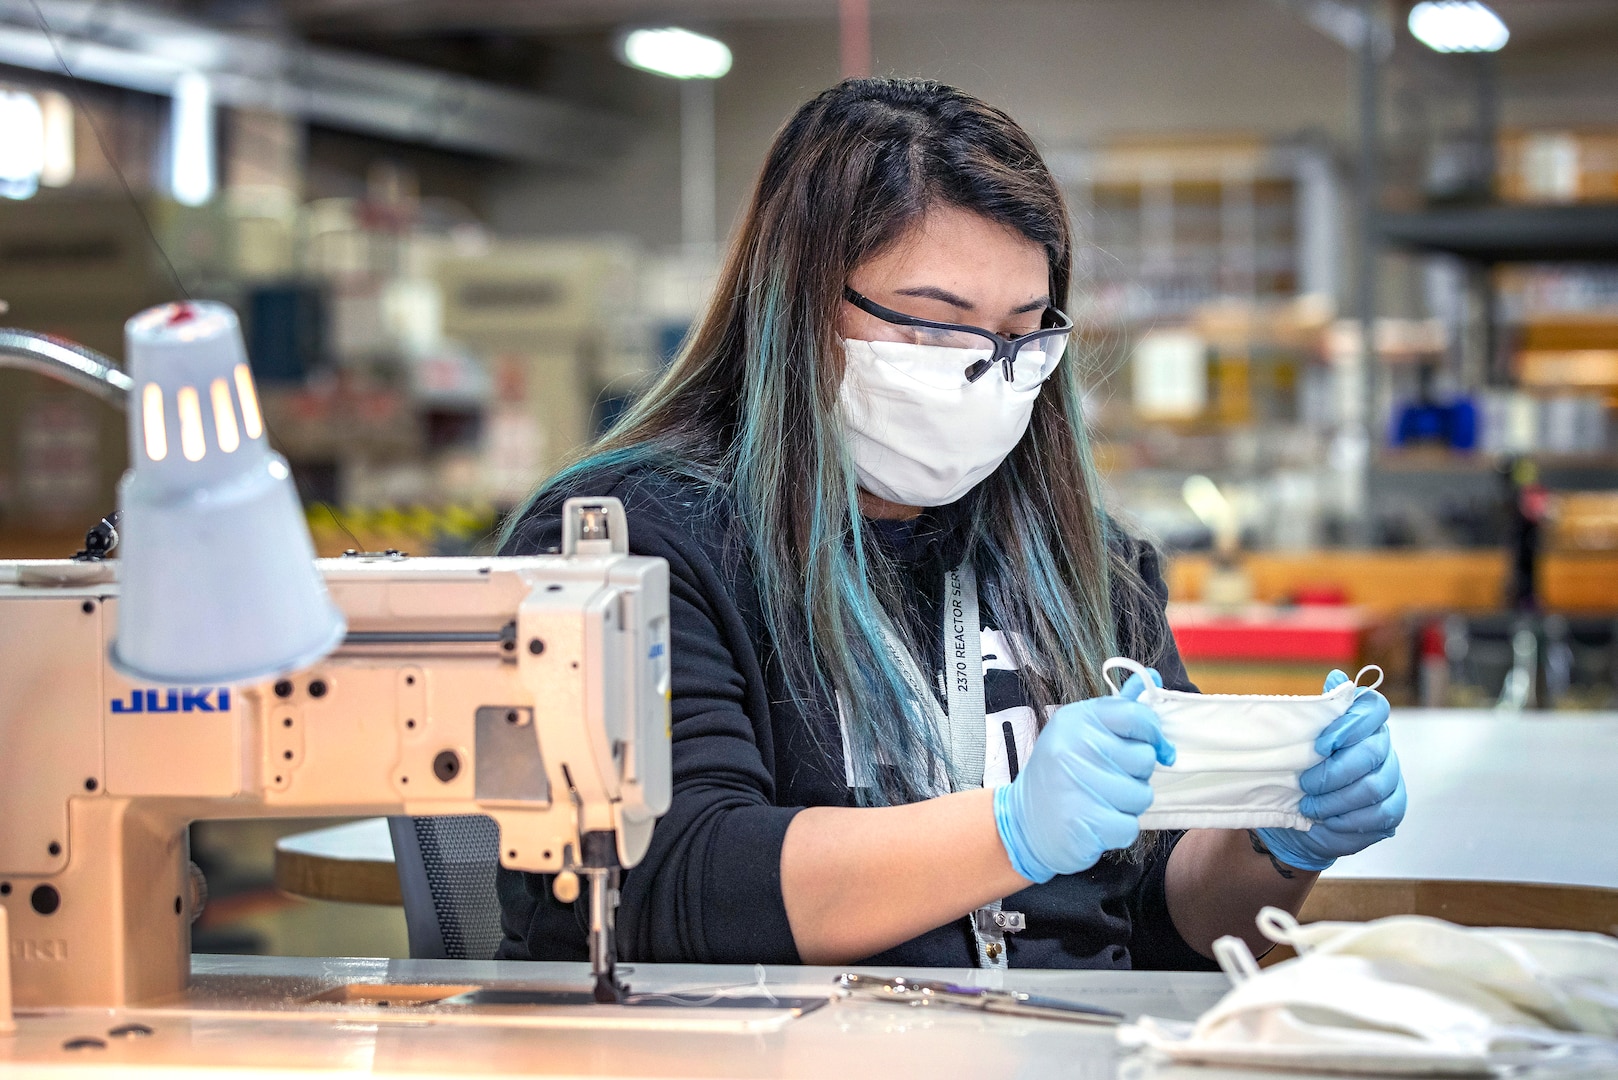 Shop 64 fabric workers at Puget Sound Naval Shipyard & Intermediate Maintenance Facility in Bremerton, Washington, make cloth masks and polycarbonate face shields that can be used to protect the workforce, or provided to Naval Hospital Bremerton and local hospitals if the need arises.